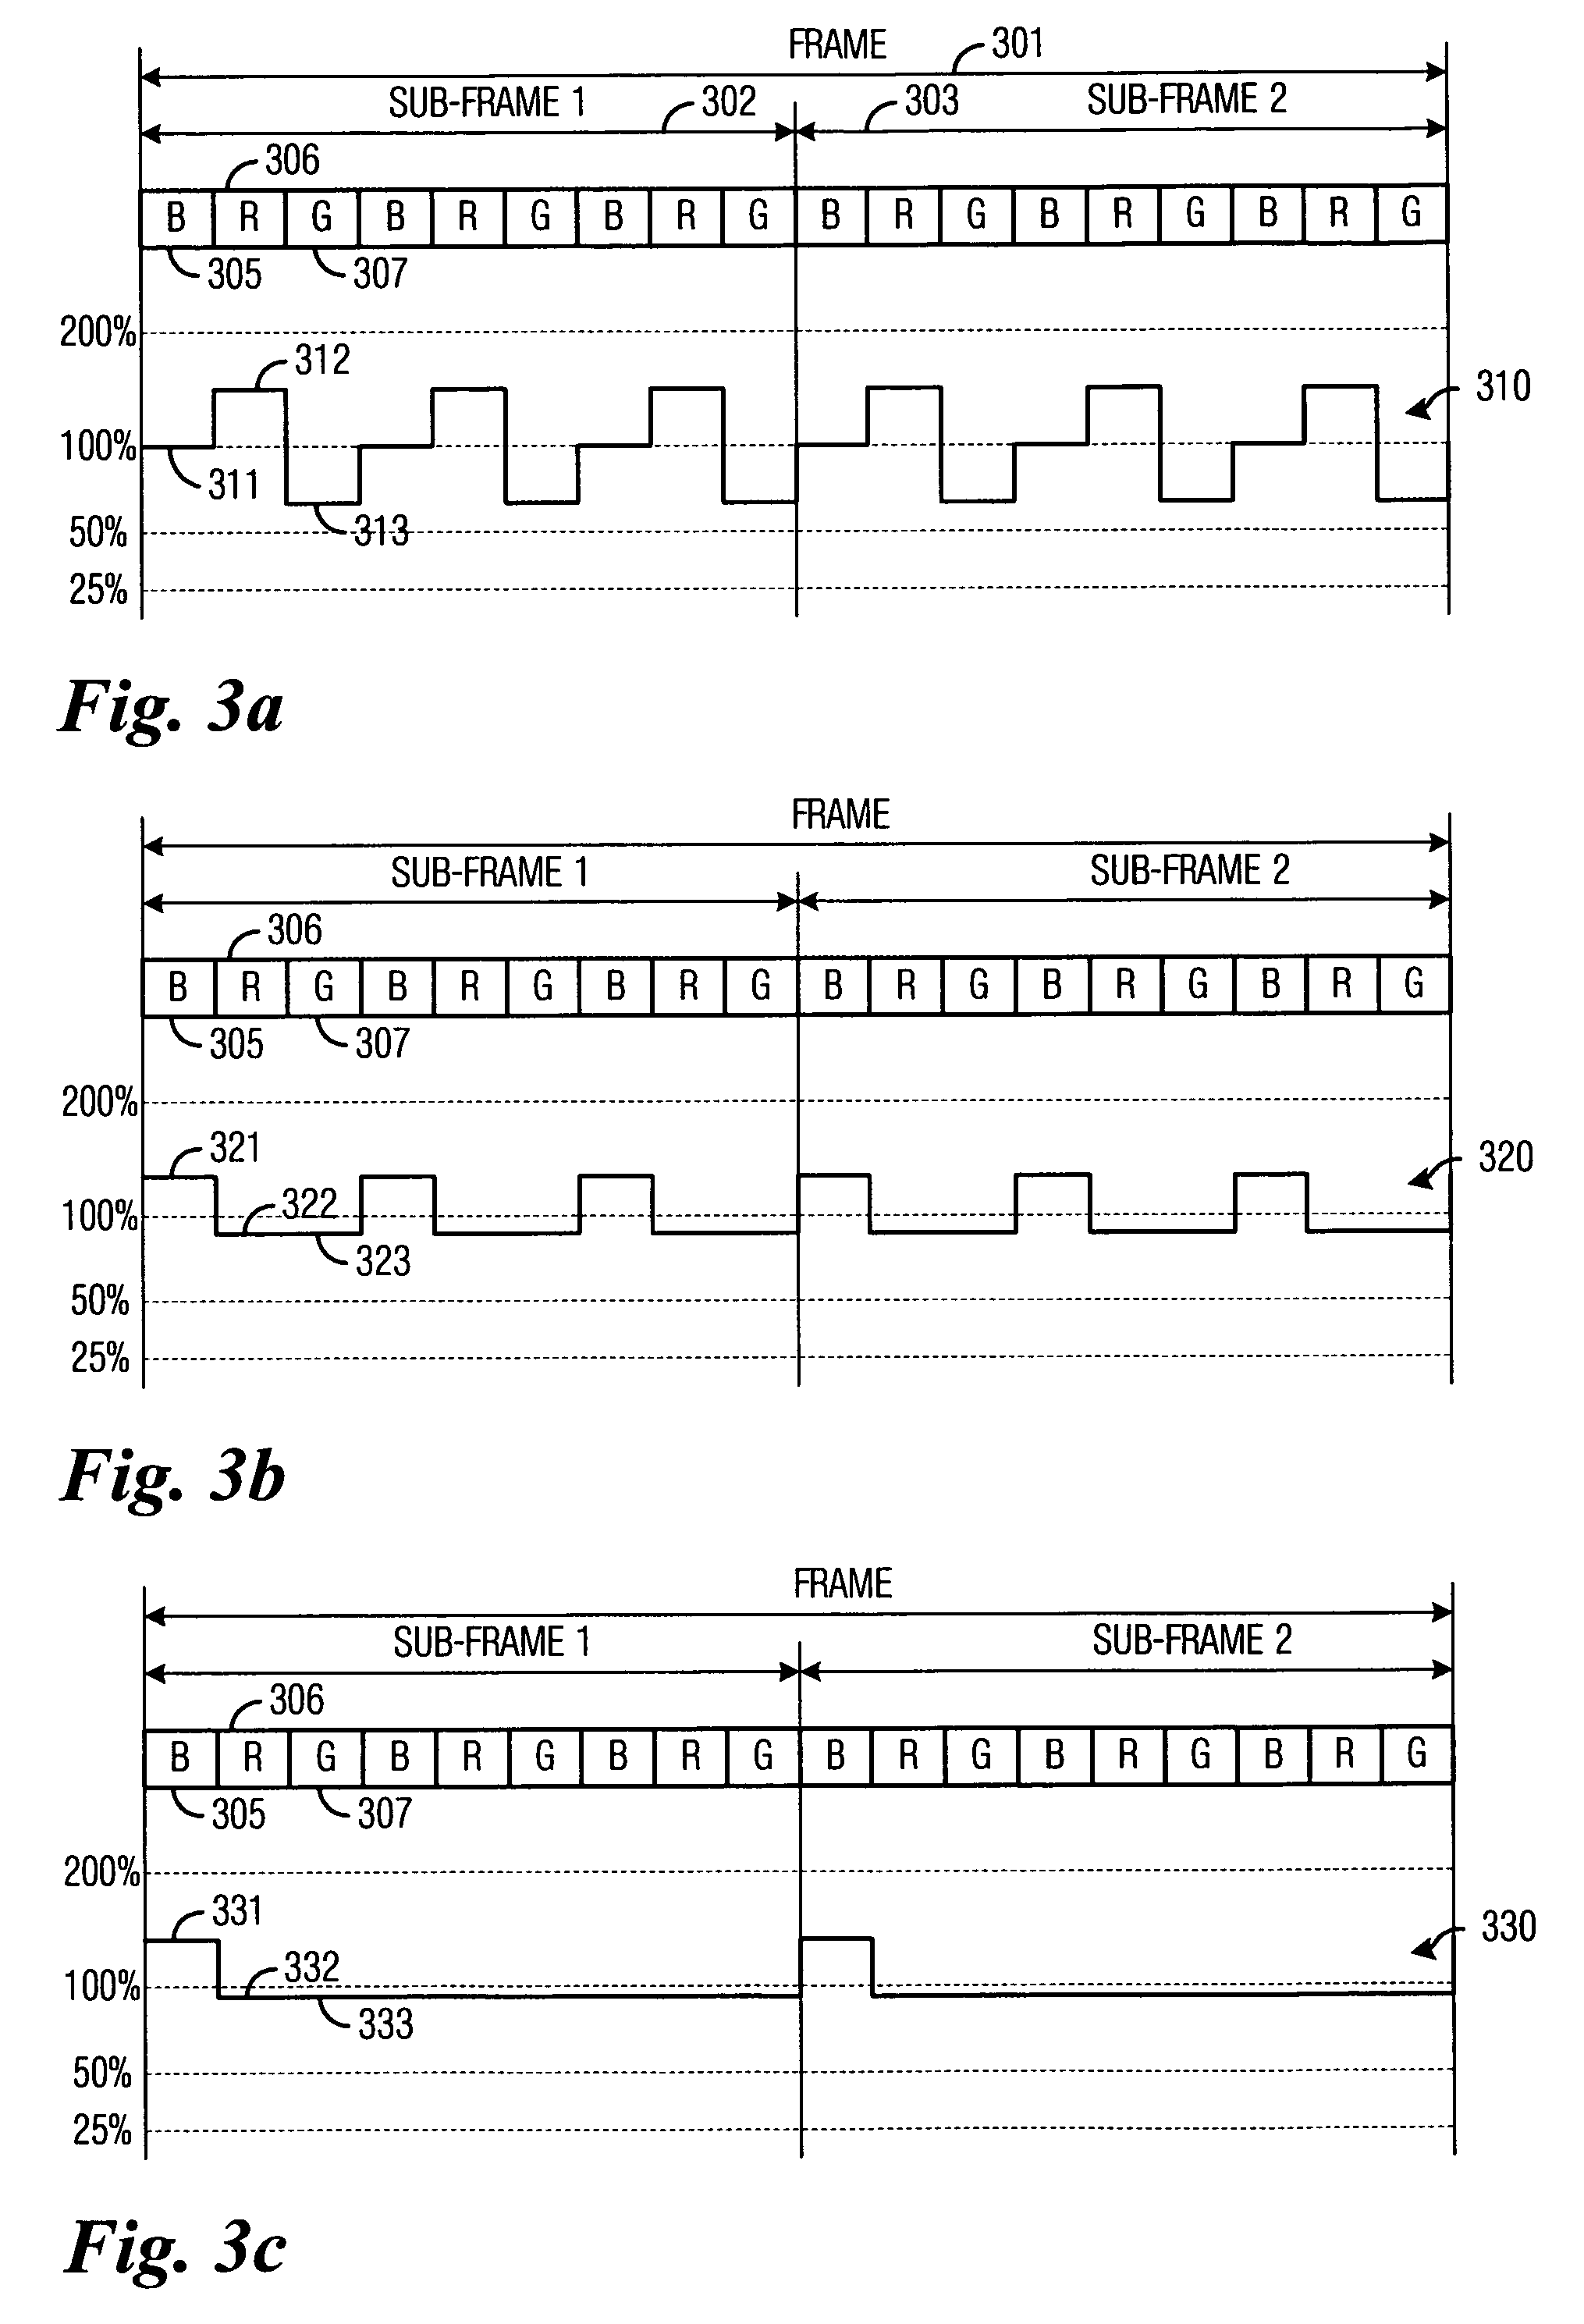 System and method for displaying images